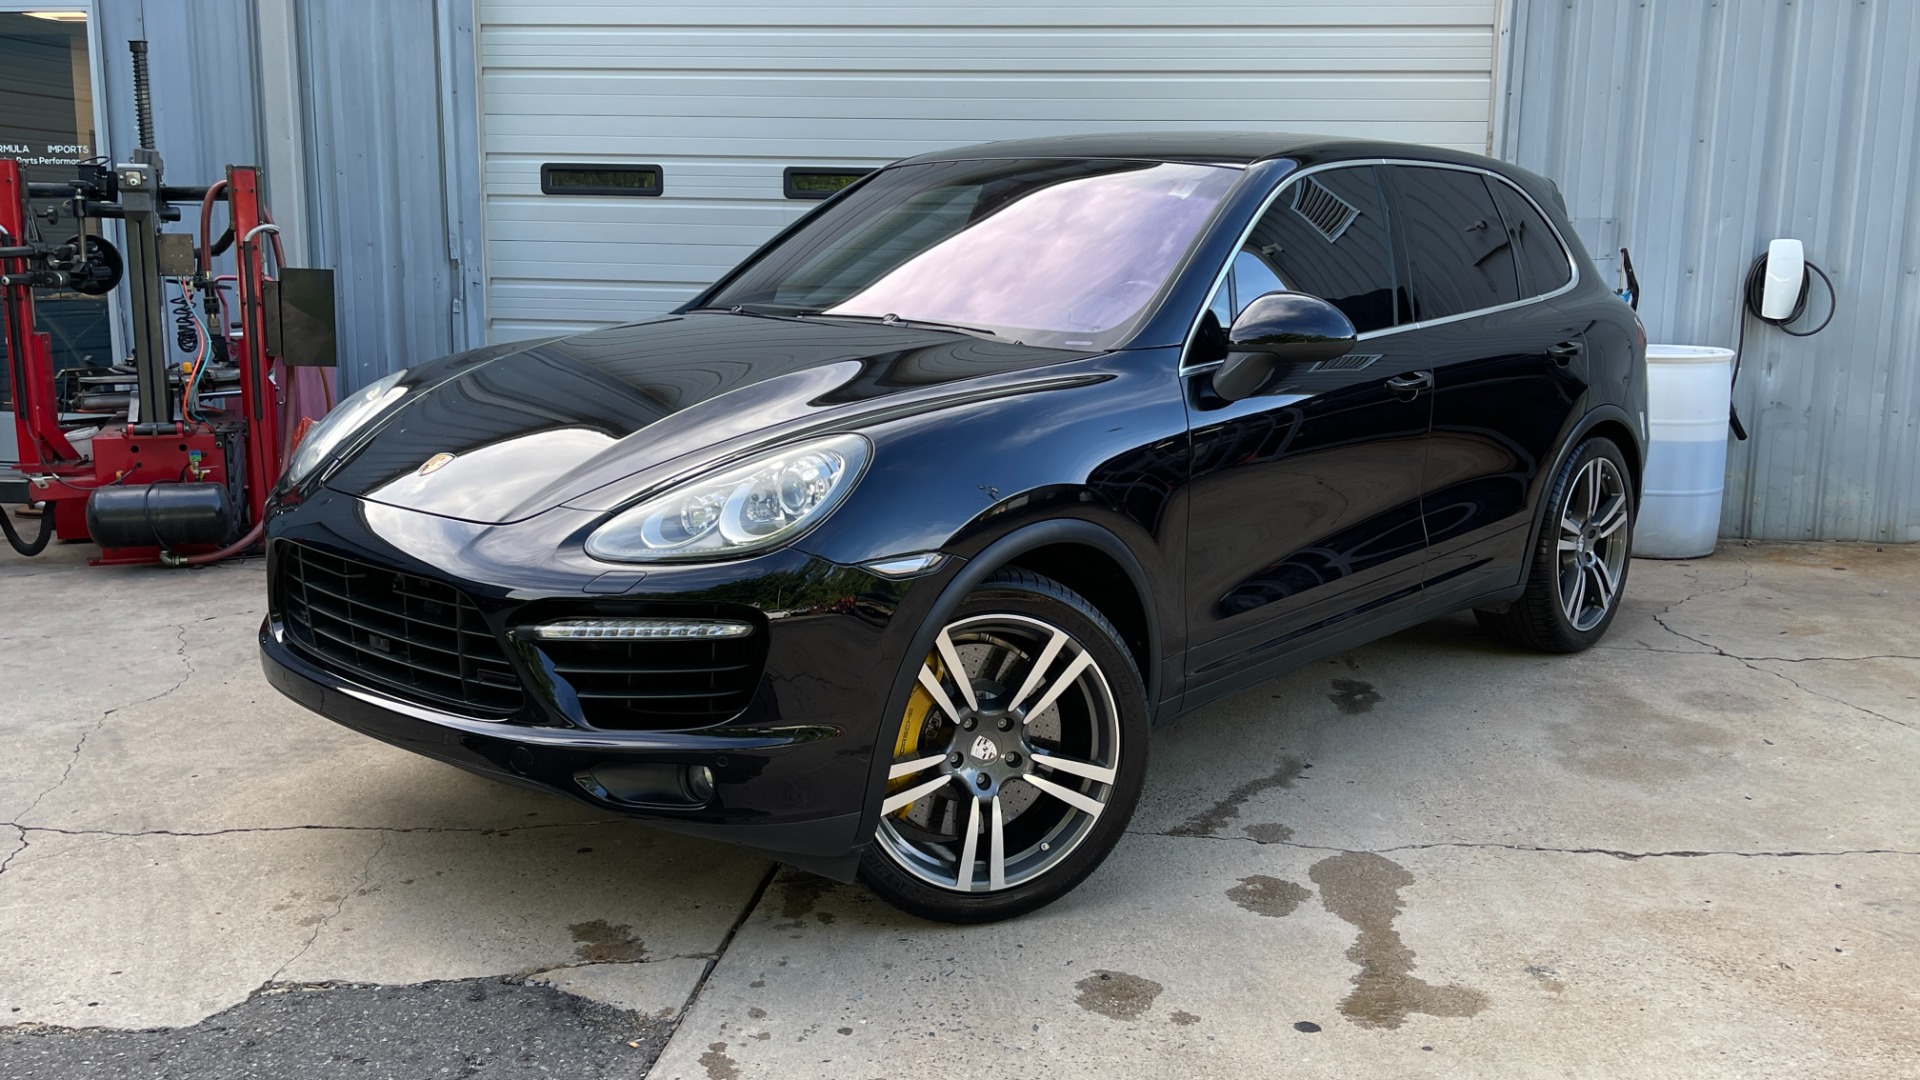 Used 2011 Porsche Cayenne Turbo / CARBON CERAMICS / CARBON FIBER TRIM / 21IN WHEELS / PREMIUM PACKAGE for sale Sold at Formula Imports in Charlotte NC 28227 39